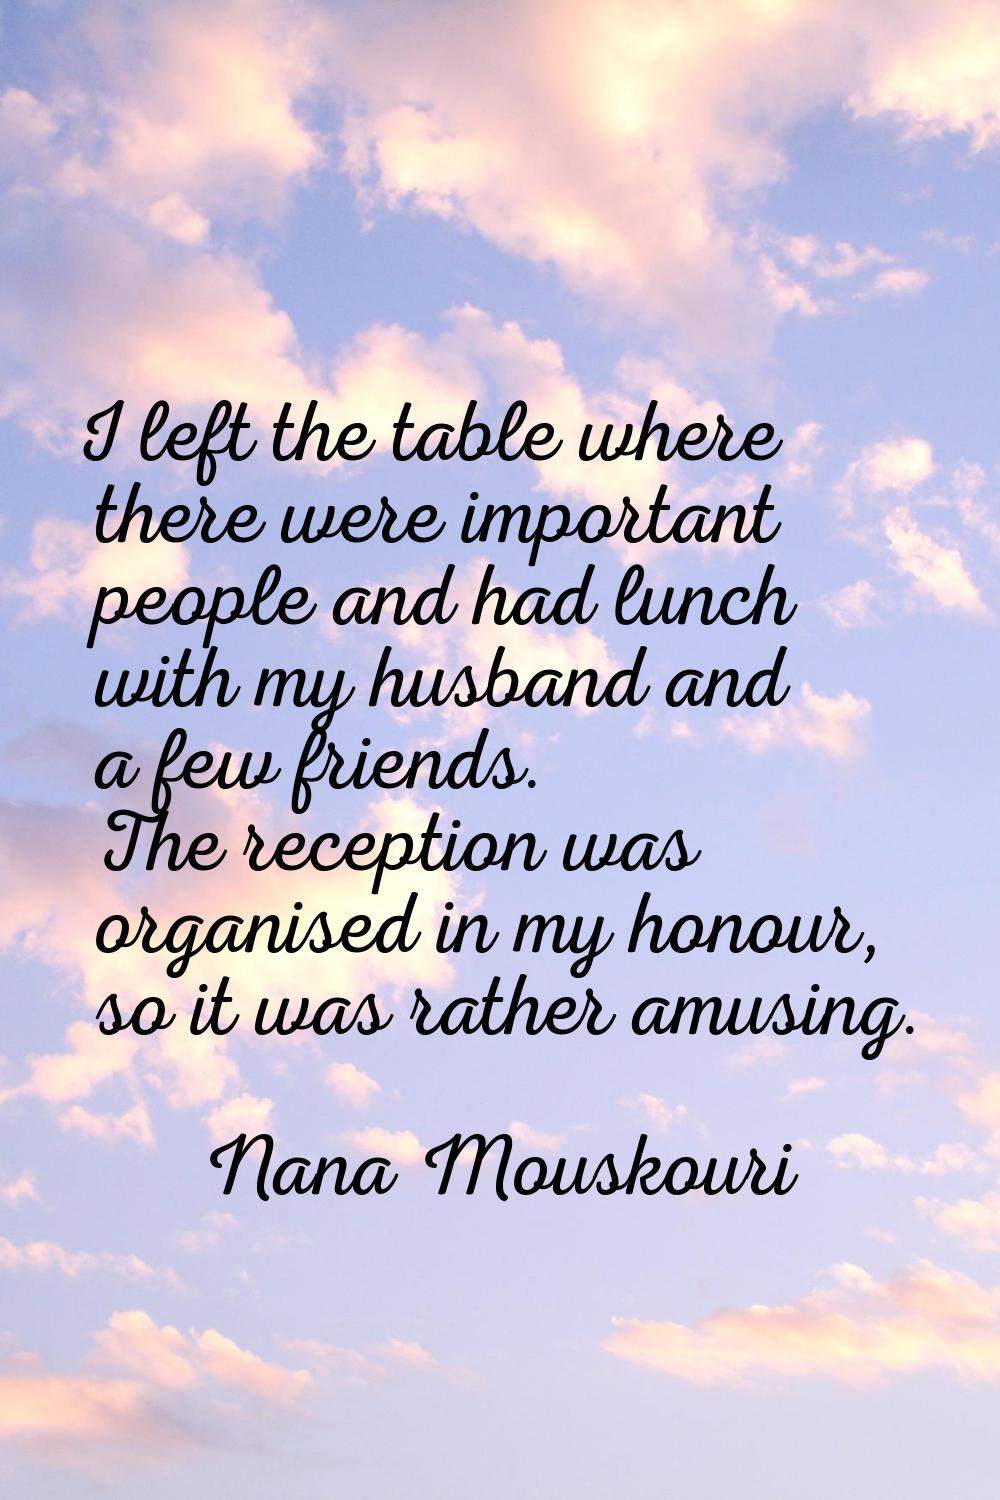 I left the table where there were important people and had lunch with my husband and a few friends.